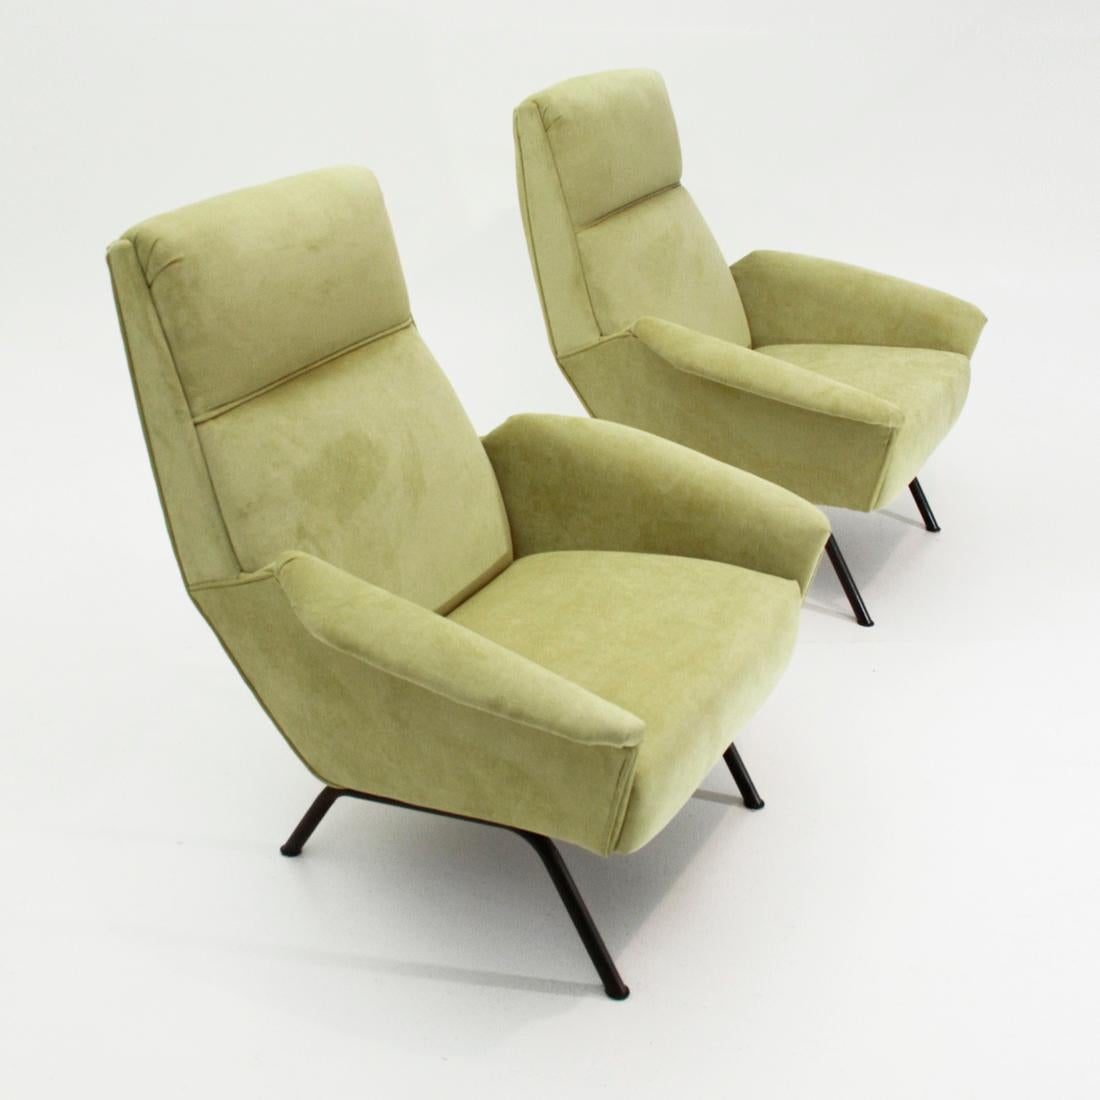 Pair of Italian manufacturing armchairs produced in the 1950s.
Wooden frame padded and lined with new acid green velvet fabric.
Base in black painted metal tubular. 
Good general conditions, some signs due to normal use over time.

Dimensions: